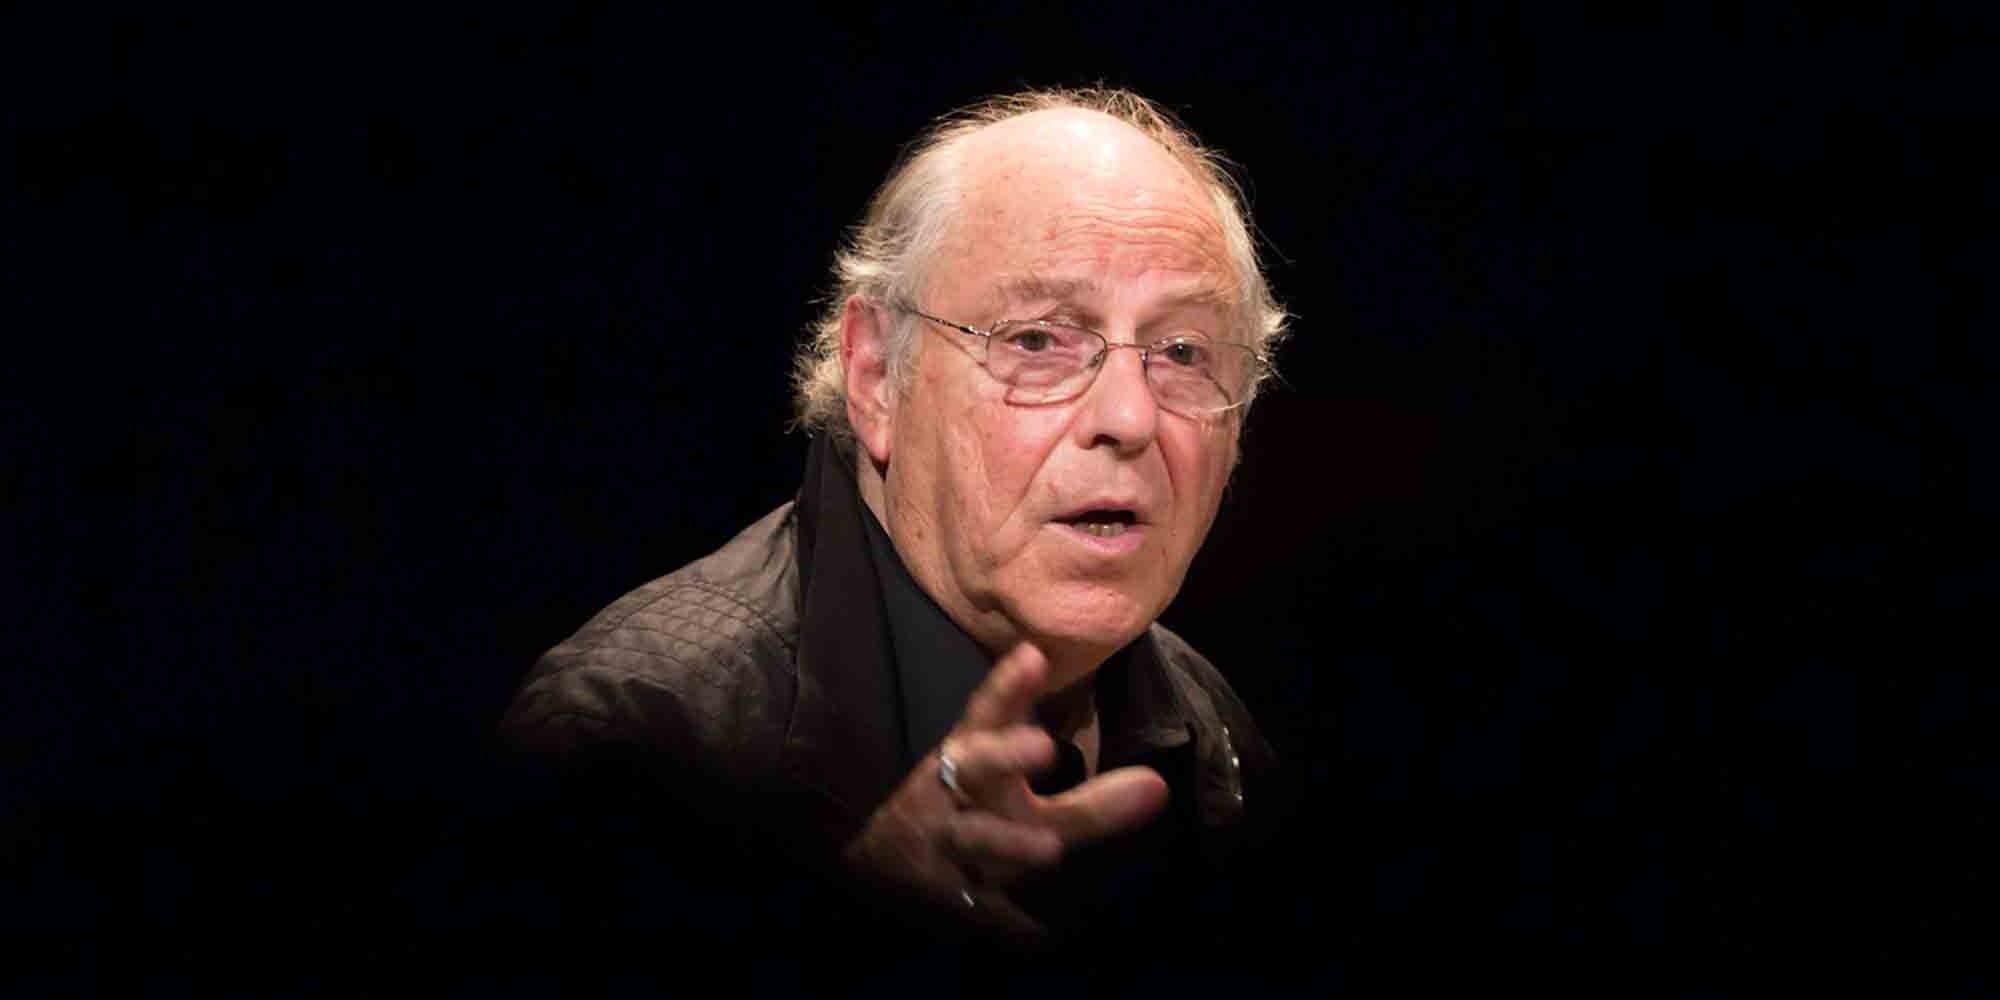 <strong>2014:</strong> Artist, theorist and visionary thinker: Ars Electronica honors Roy Ascott as Visionary Pioneer of Media Art.